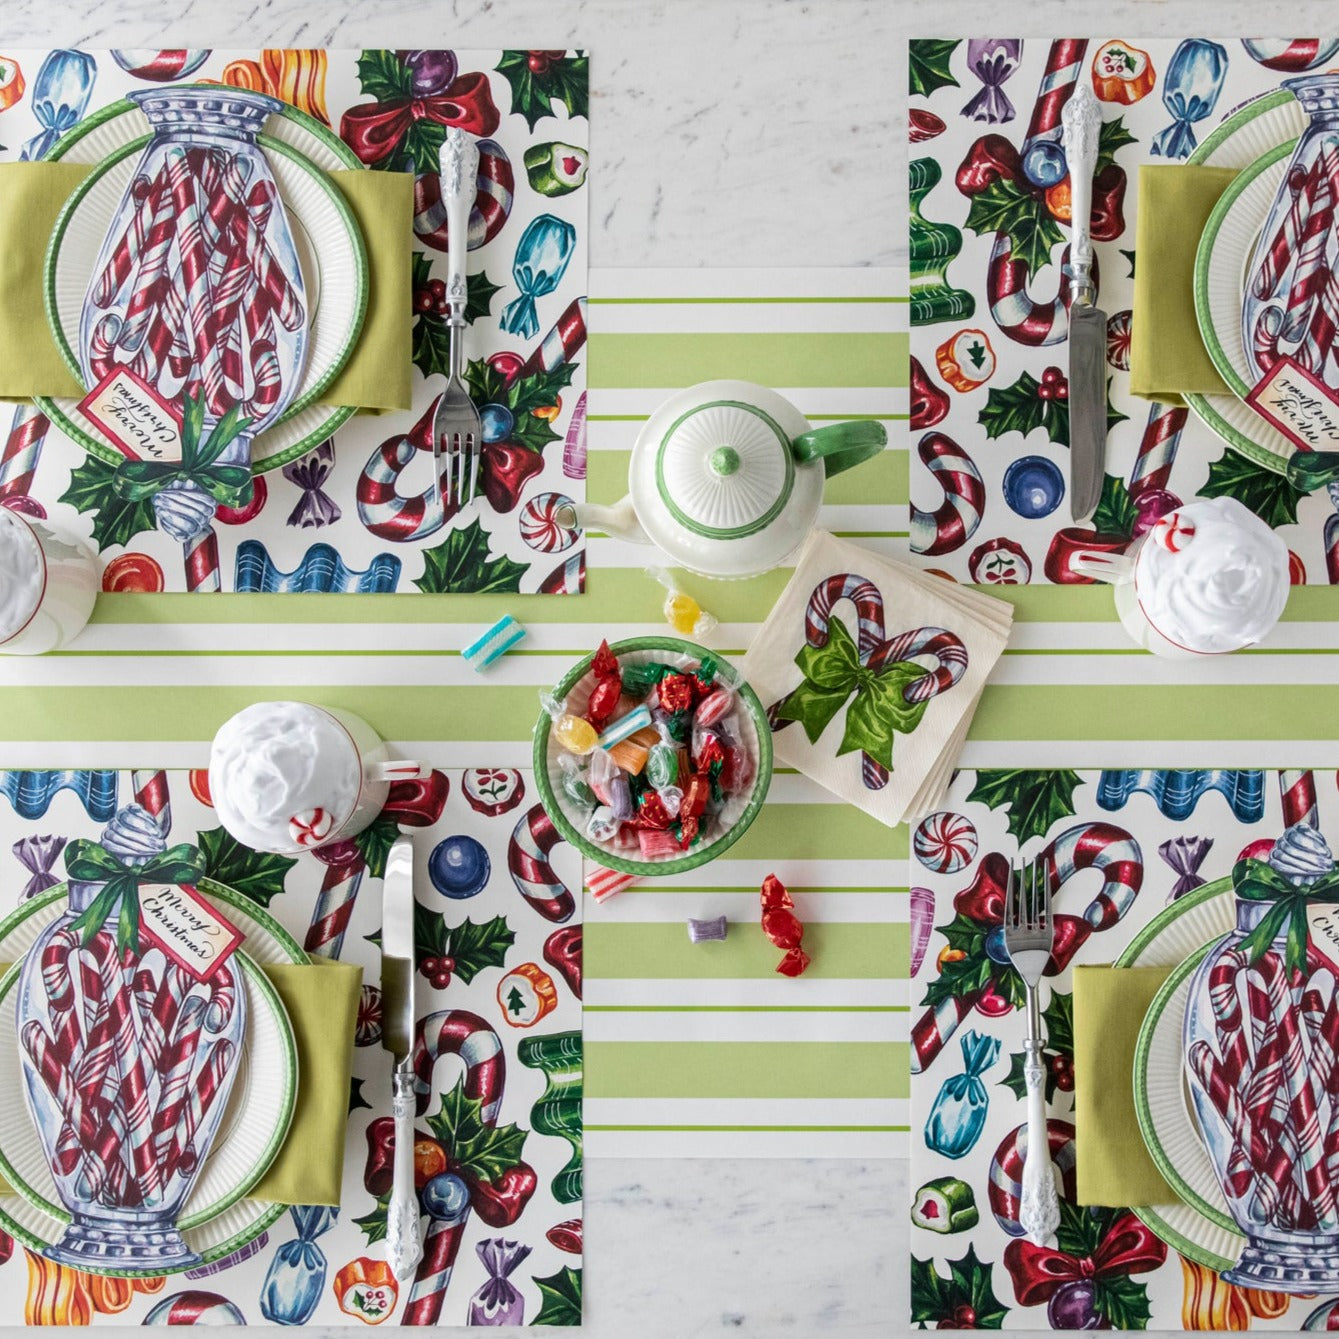 The Candy Cane Shoppe Placemat under a festive Christmas-themed table setting for four.